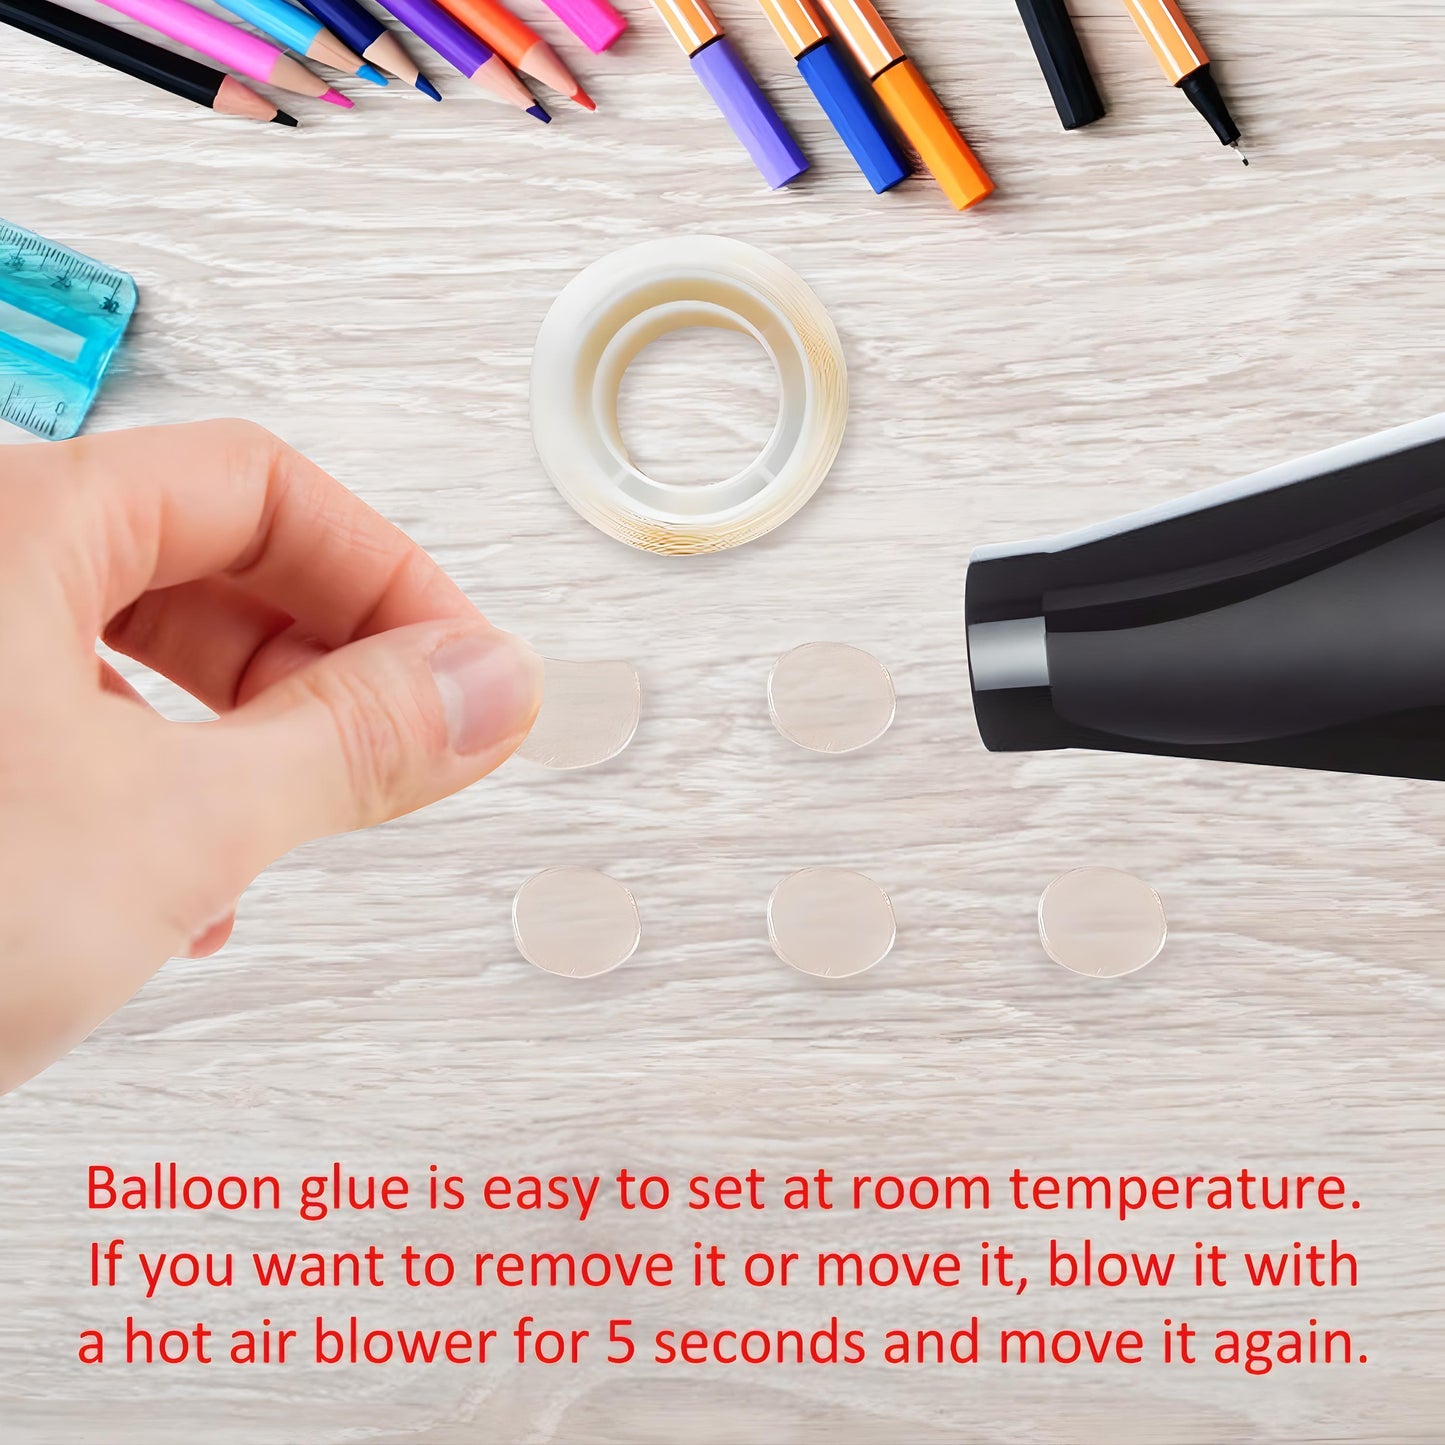 MM TOYS Balloon Glue Dots for Balloons Adhesive Accessories, Transparent Glue Dots